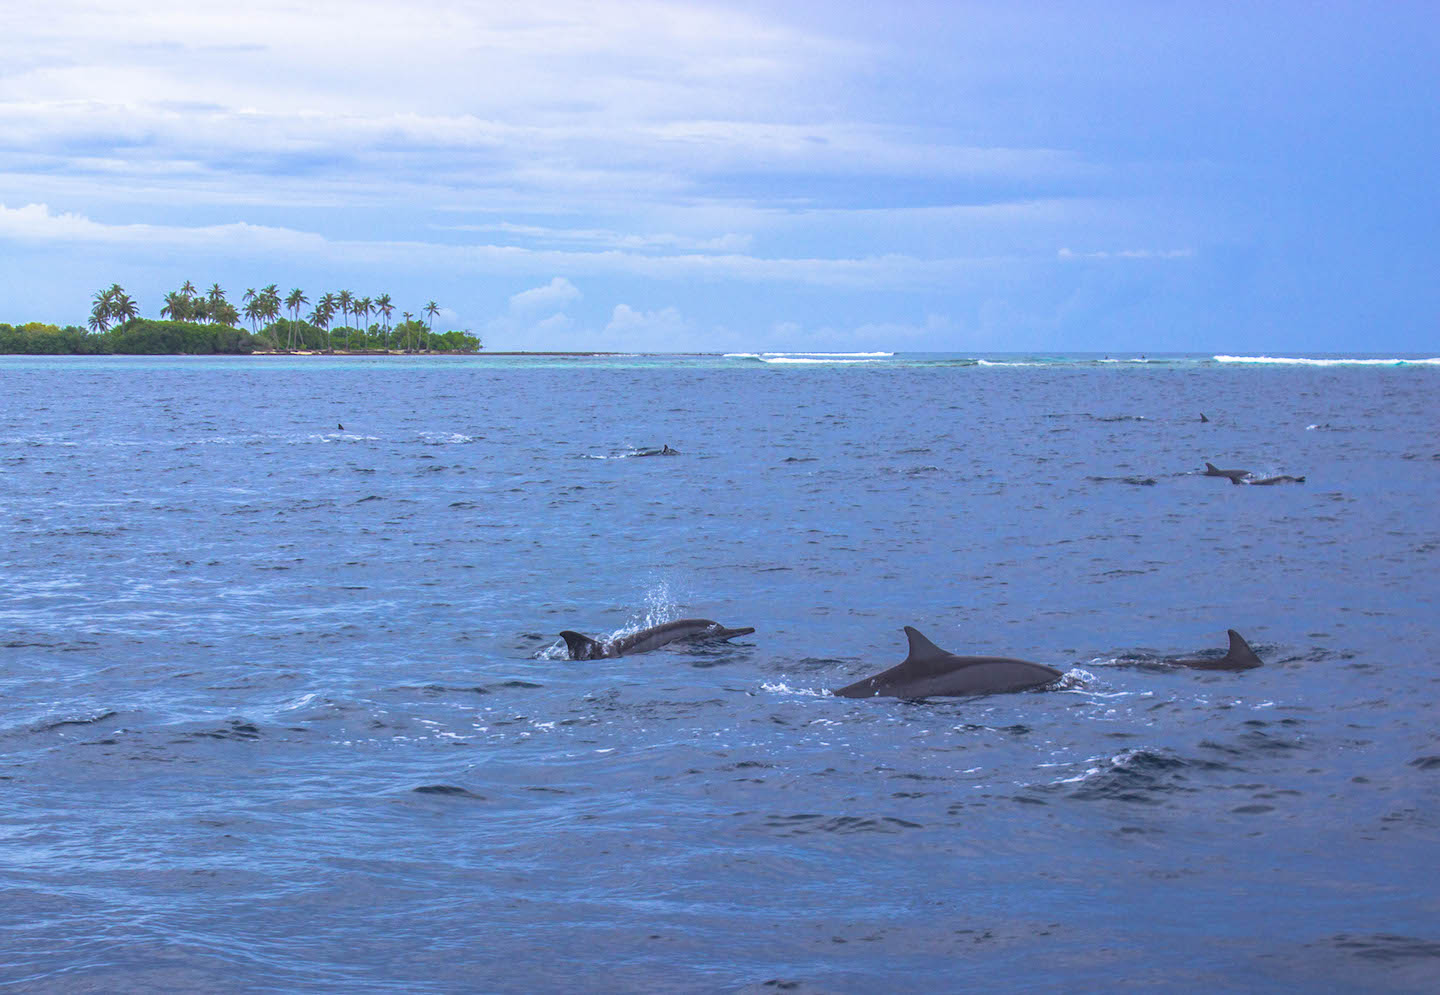 Dolphins swimming by, Manta Point, Maldives